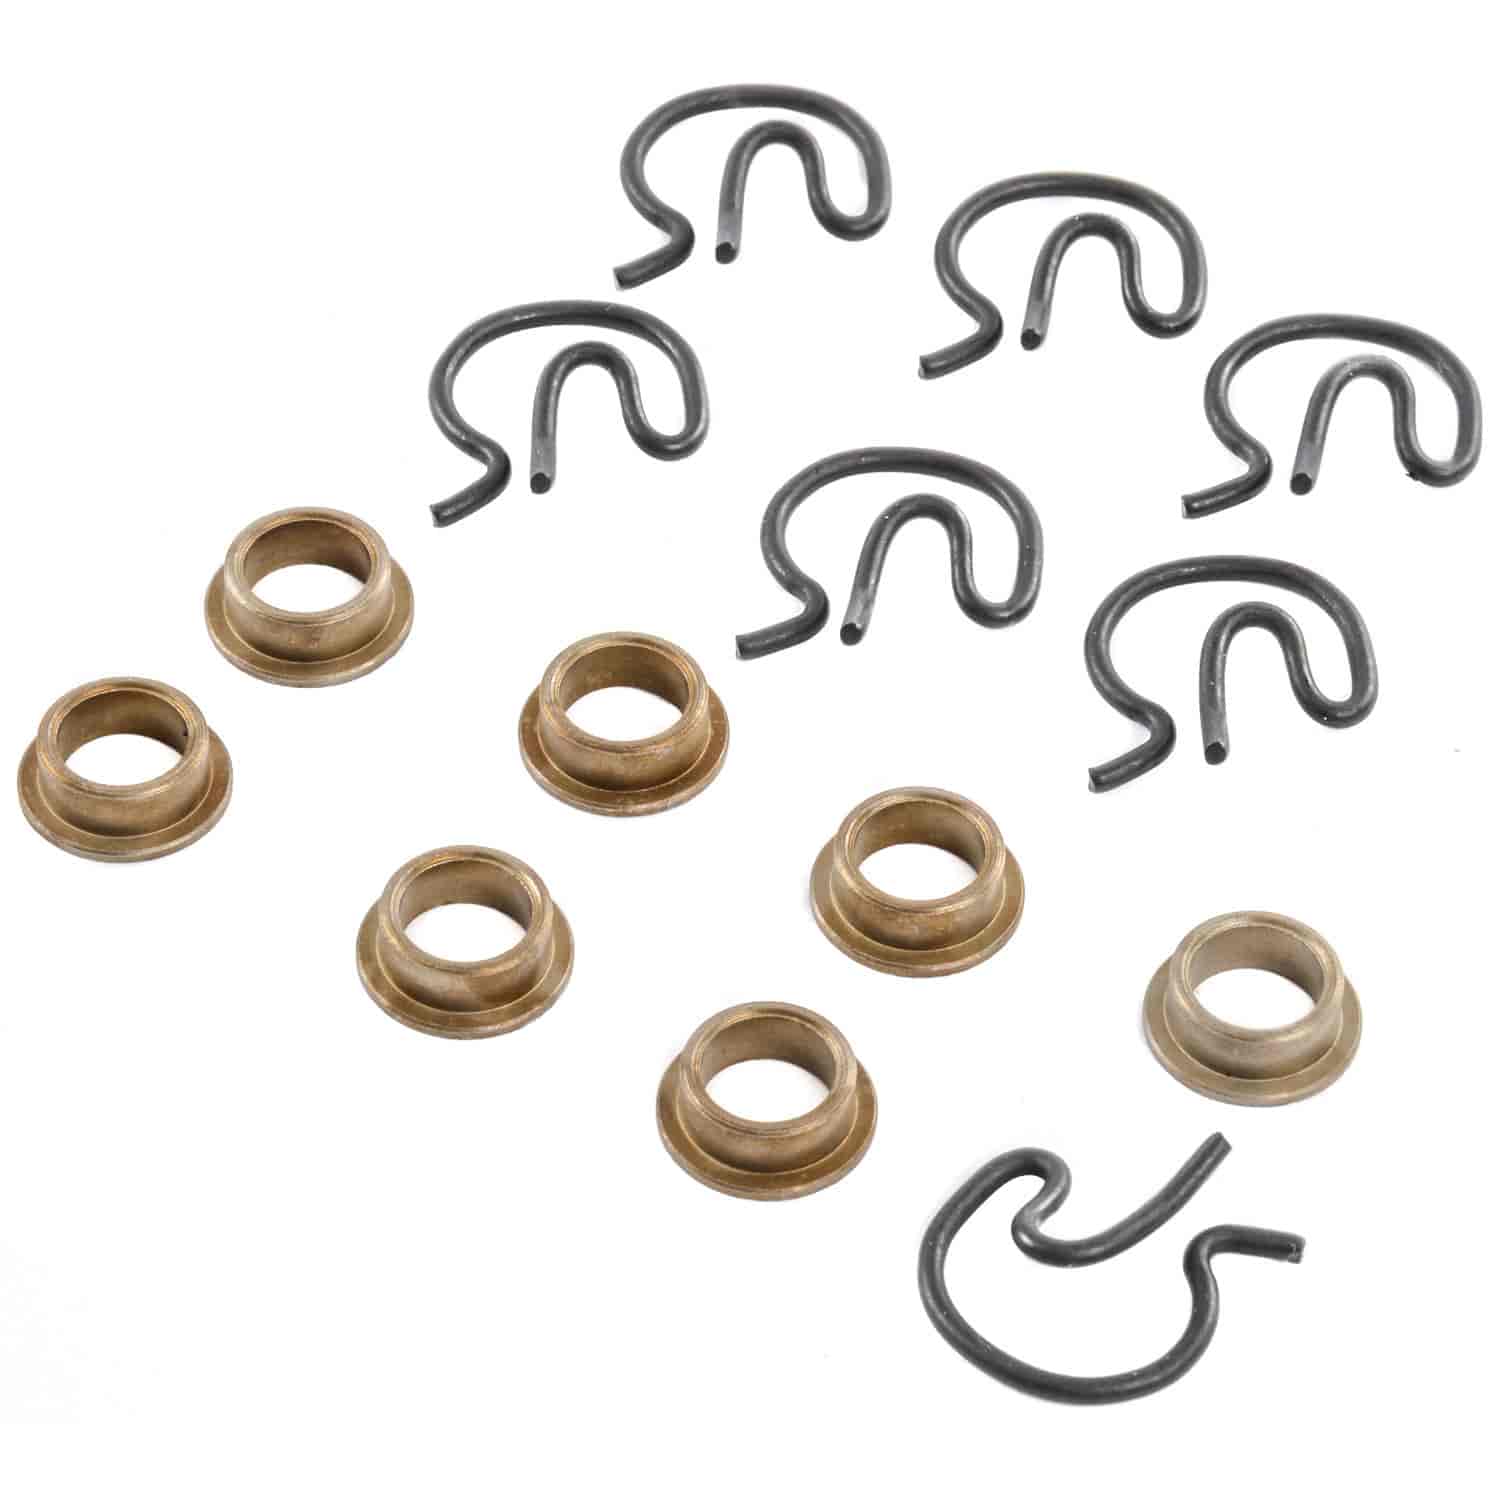 Steel Bushings and Spring Clips 3, 4, & 5 Speed Shifters